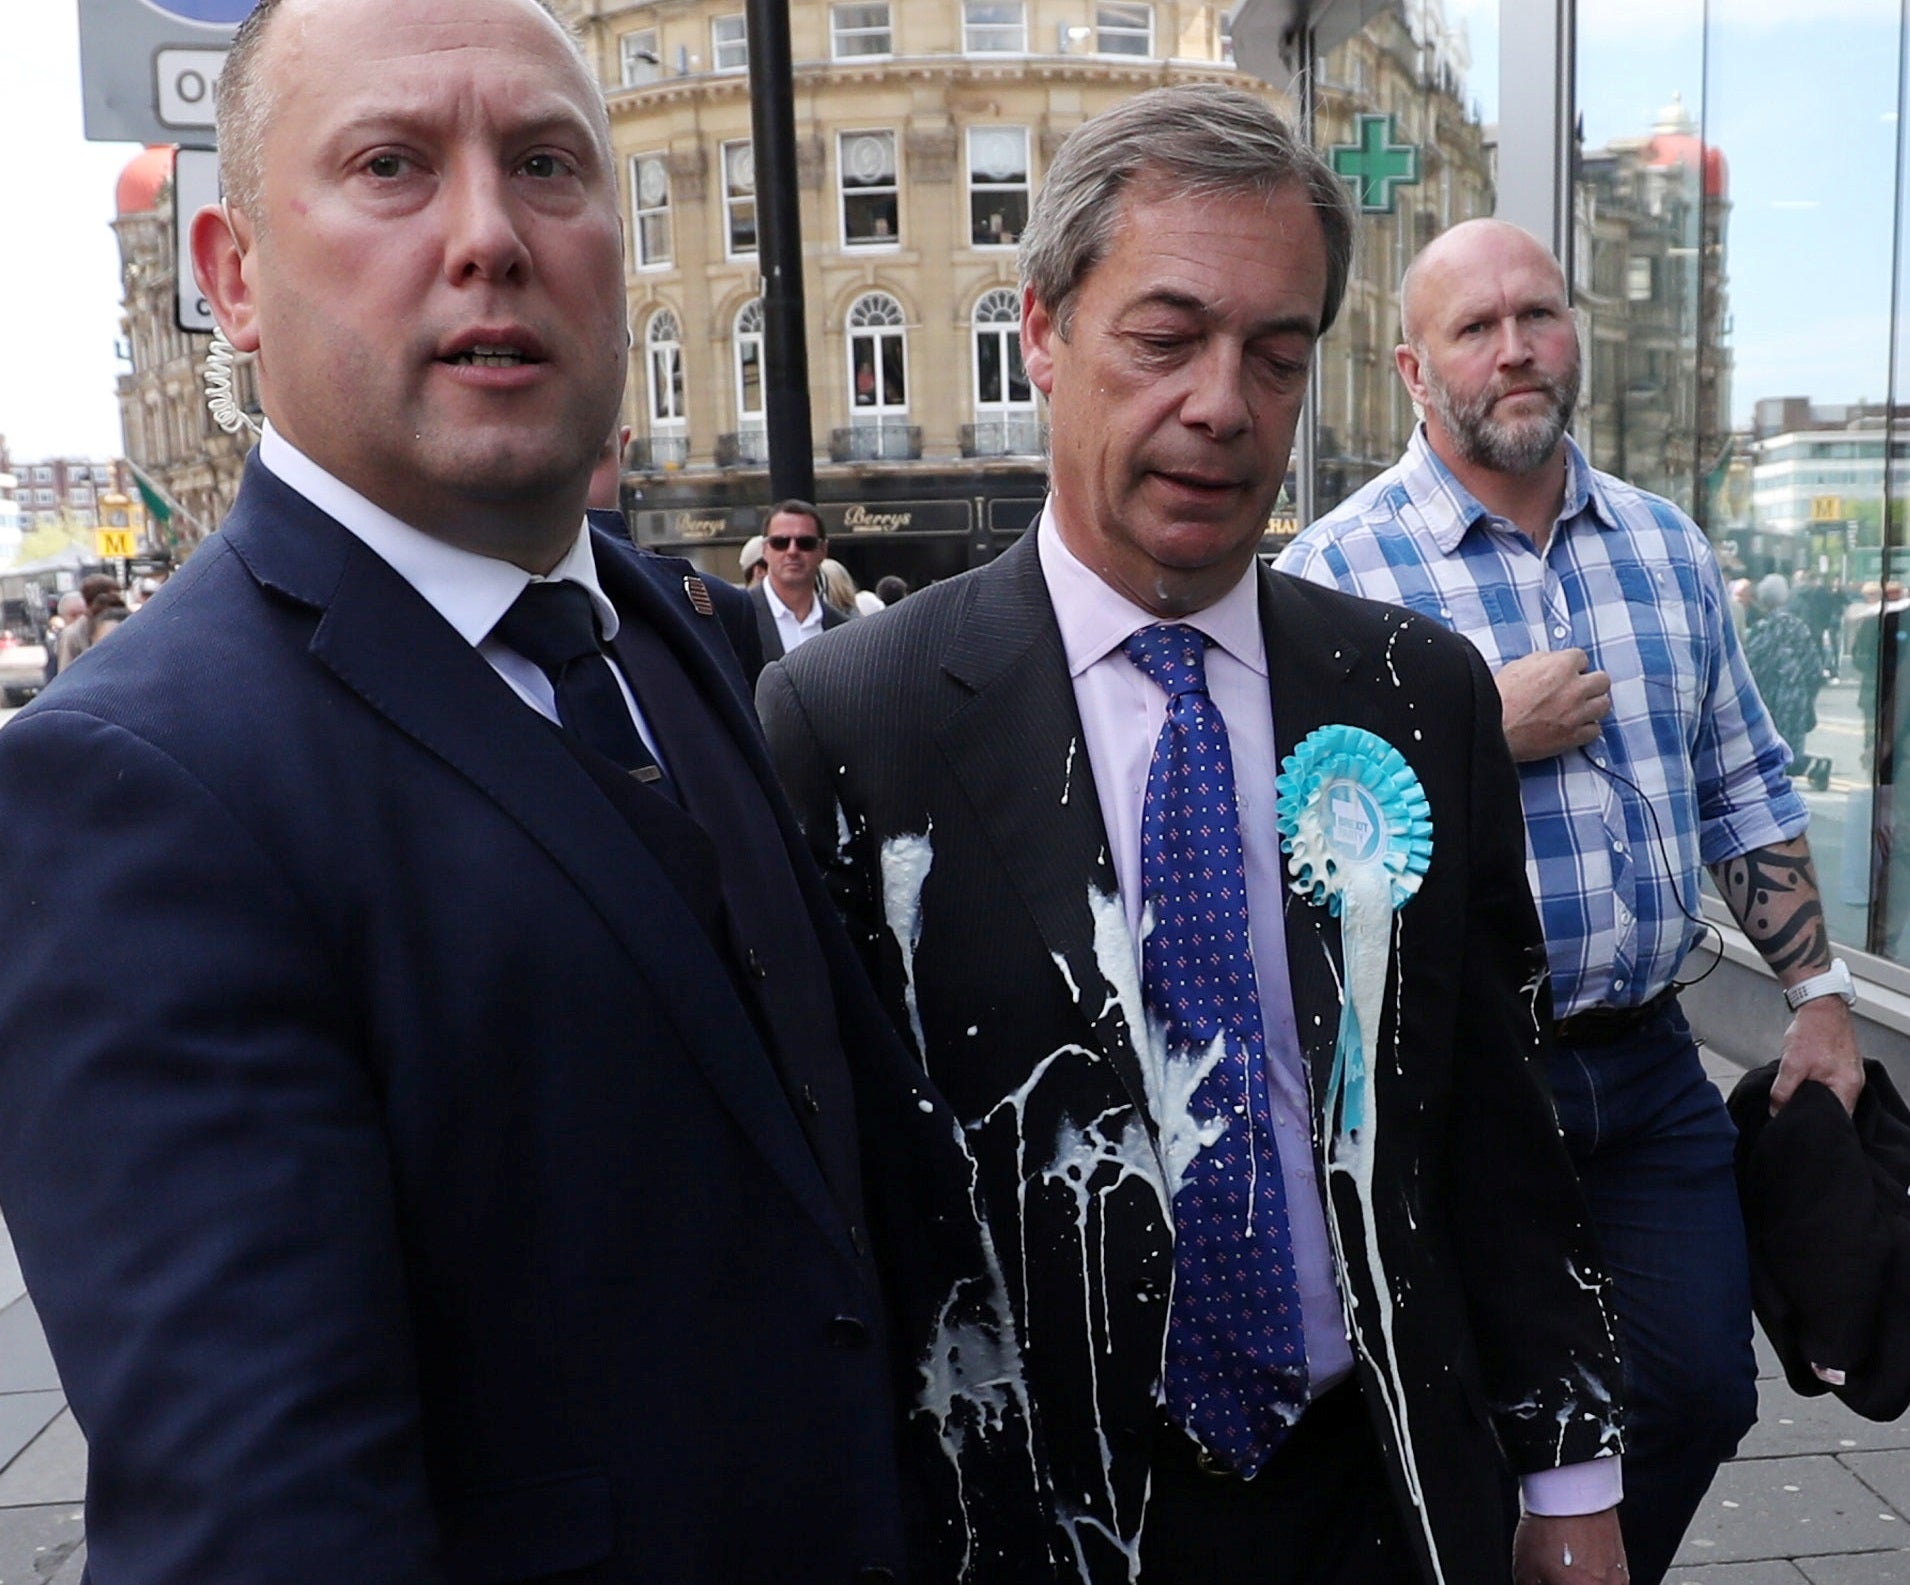 The Brexit Party leader was doused in milkshake in Newcastle on Monday